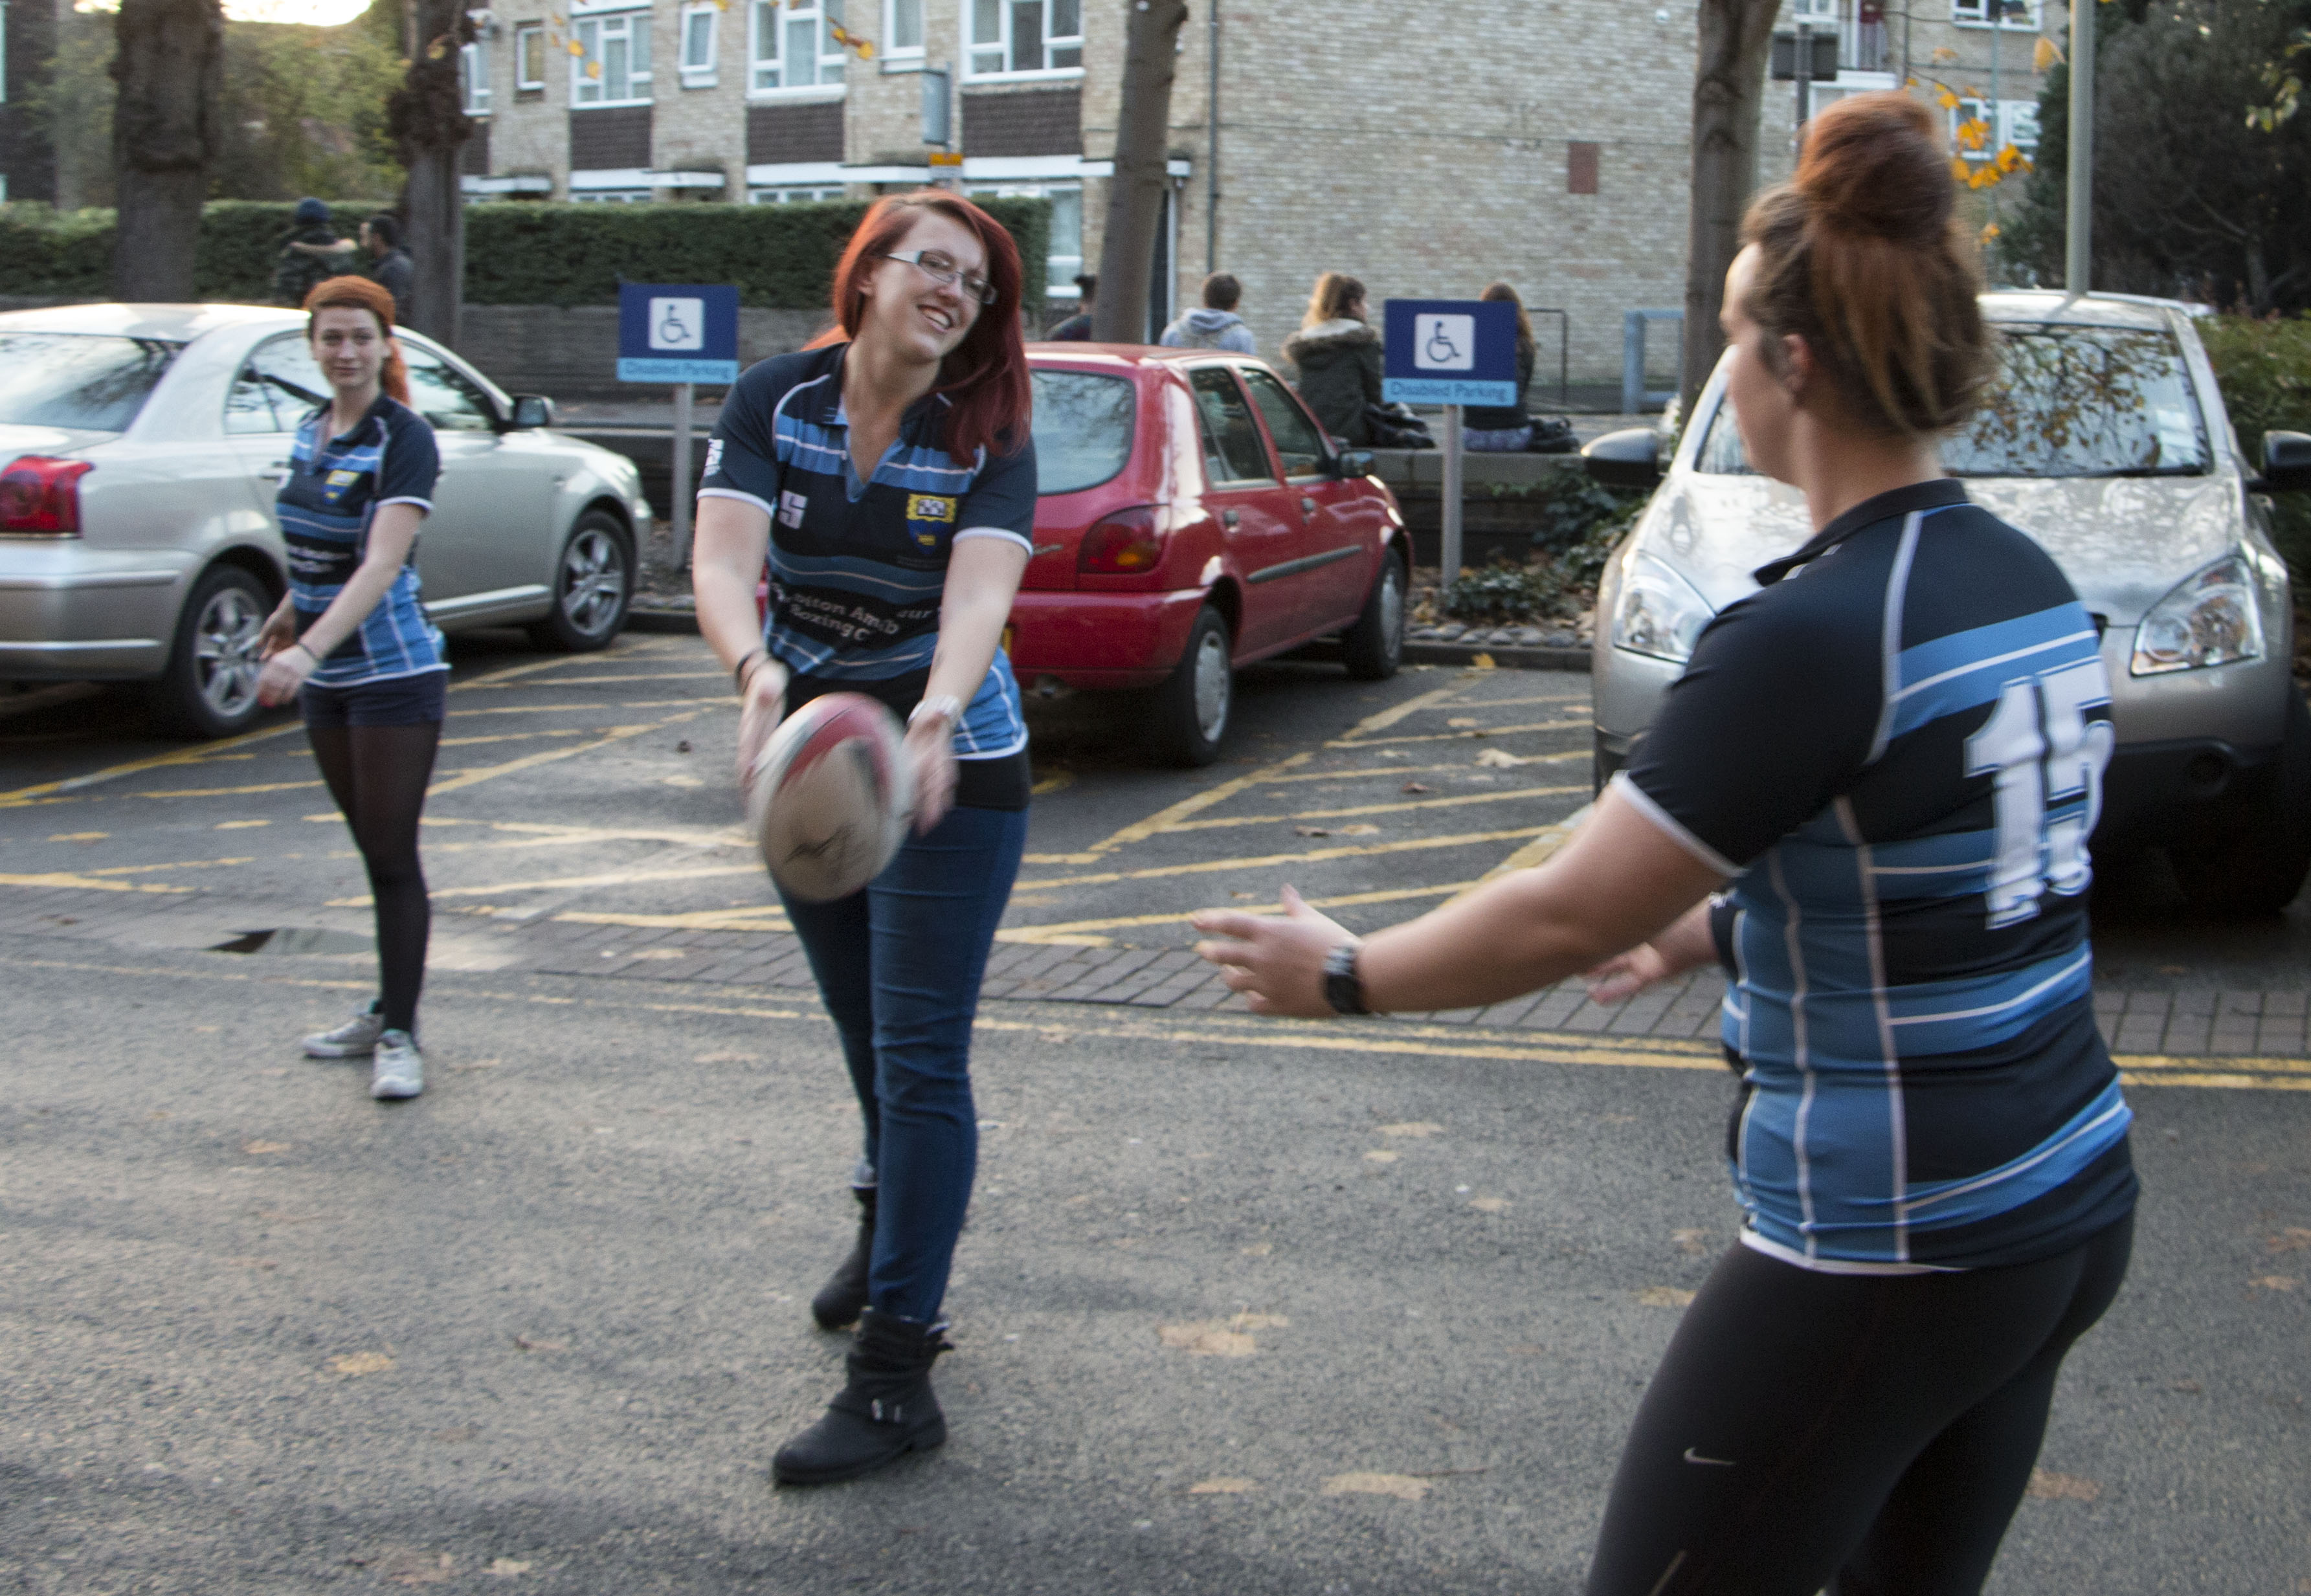 KU women’s rugby team set to appear on TV